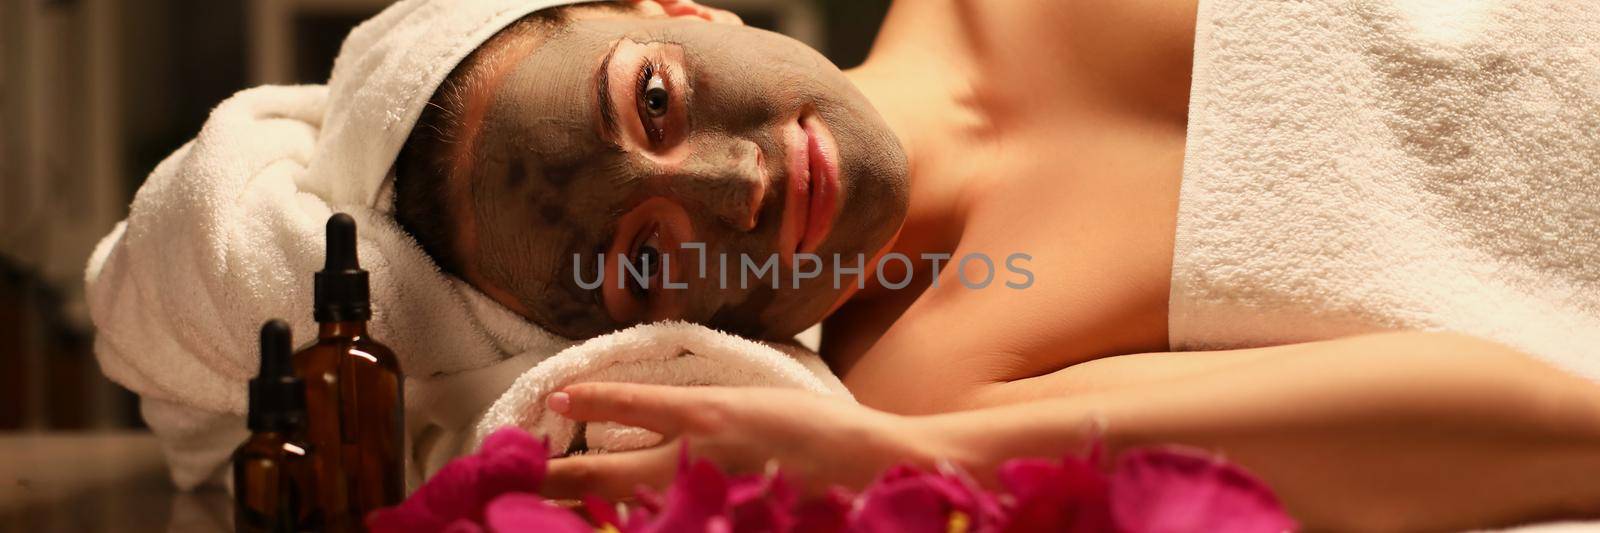 Young woman getting joy in spa by kuprevich